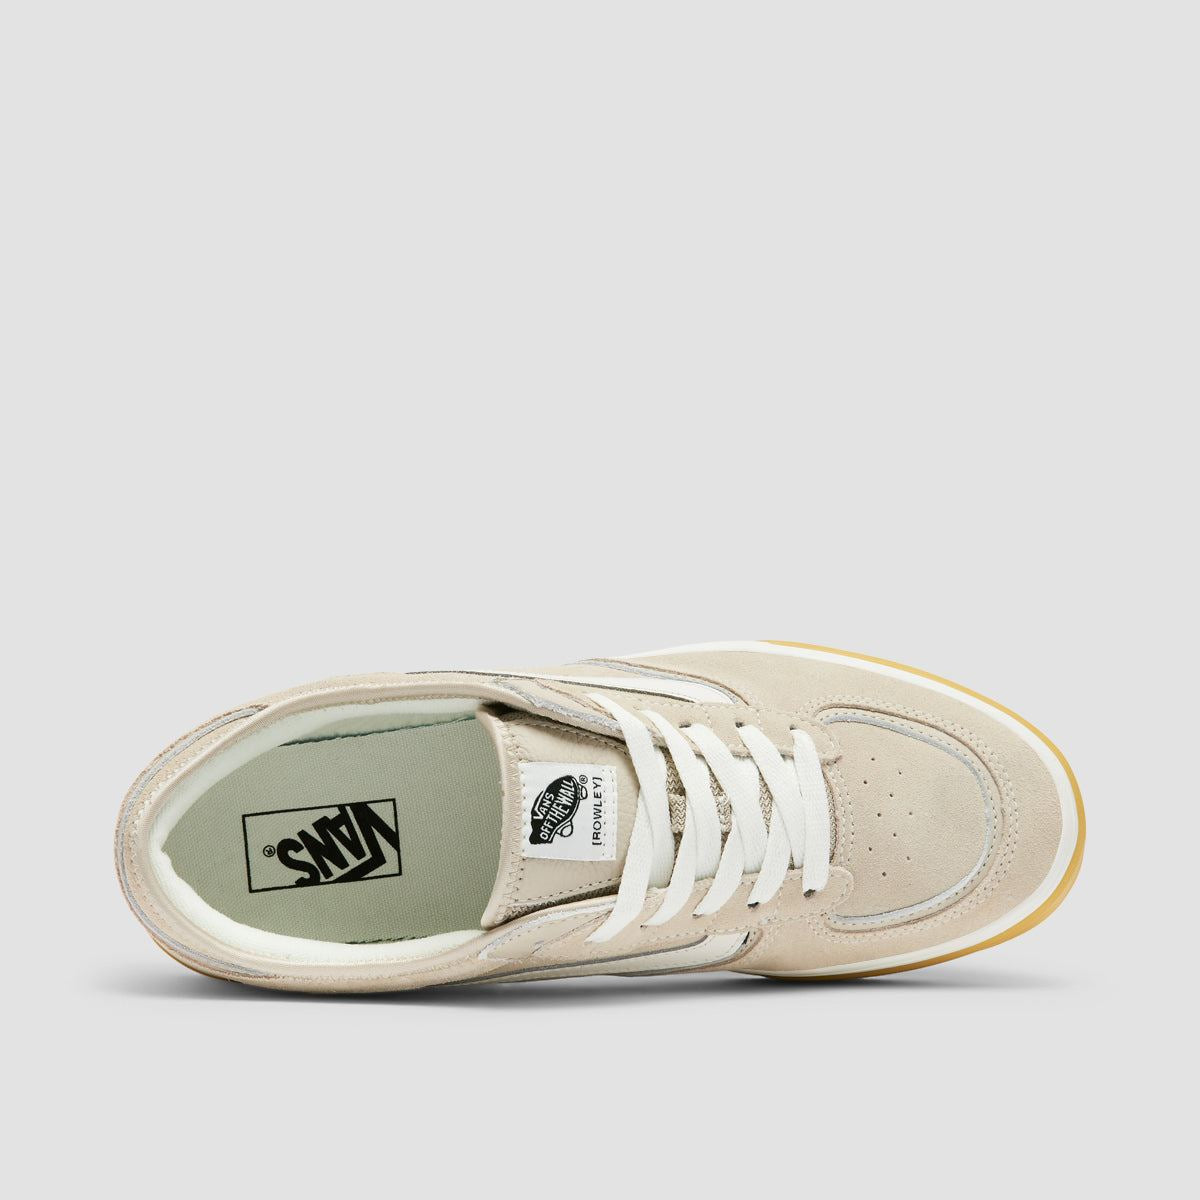 Vans Rowley Classic Shoes - Muted Clay/Gum